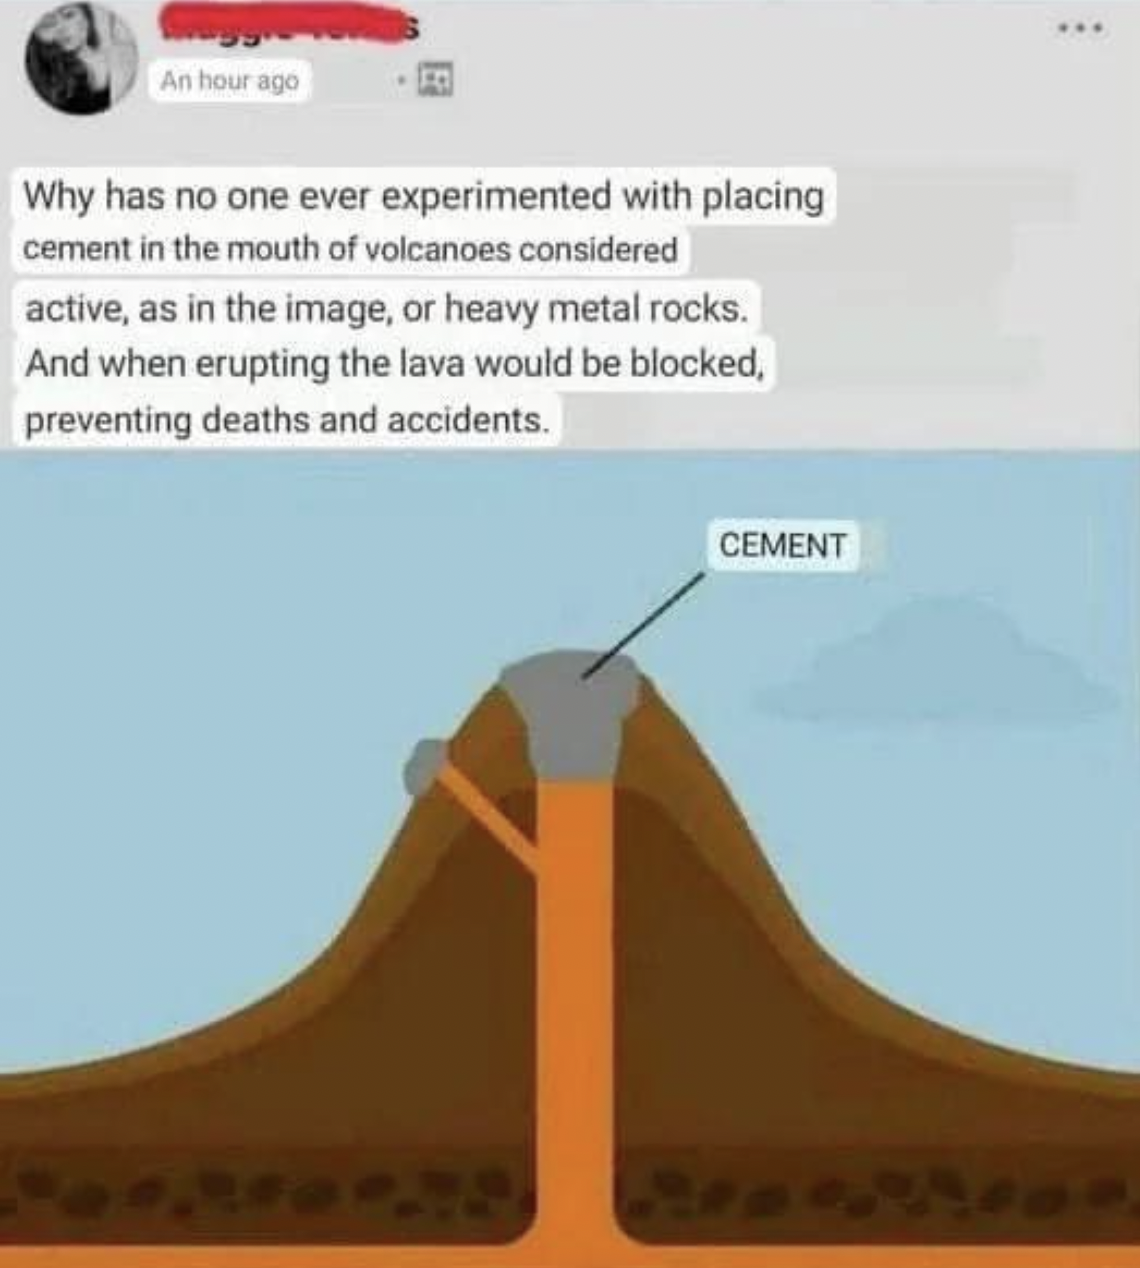 Dumb pics - plugging volcanos with cement - An hour ago Why has no one ever experimented with placing cement in the mouth of volcanoes considered active, as in the image, or heavy metal rocks. And when erupting the lava would be blocked, preventing death